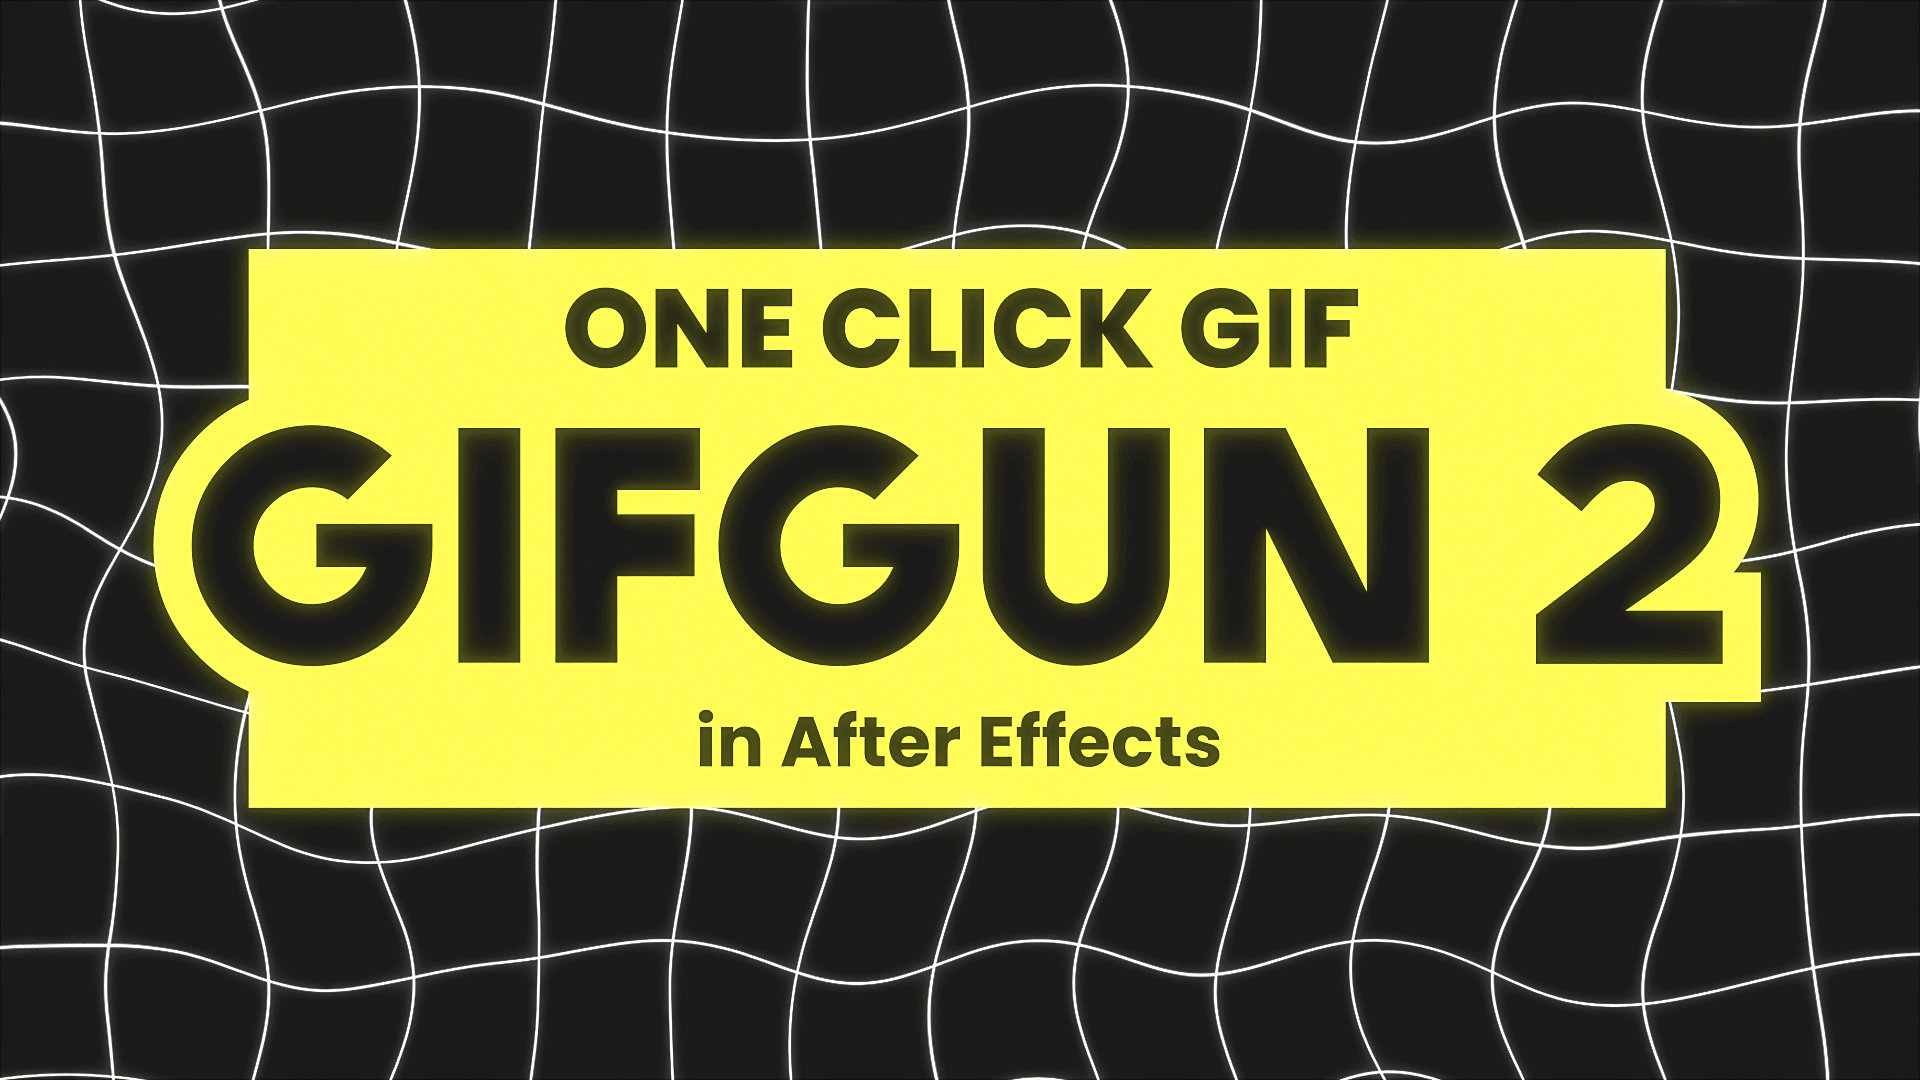 GIF Maker: Make an Animated Video from Text - Super Tool